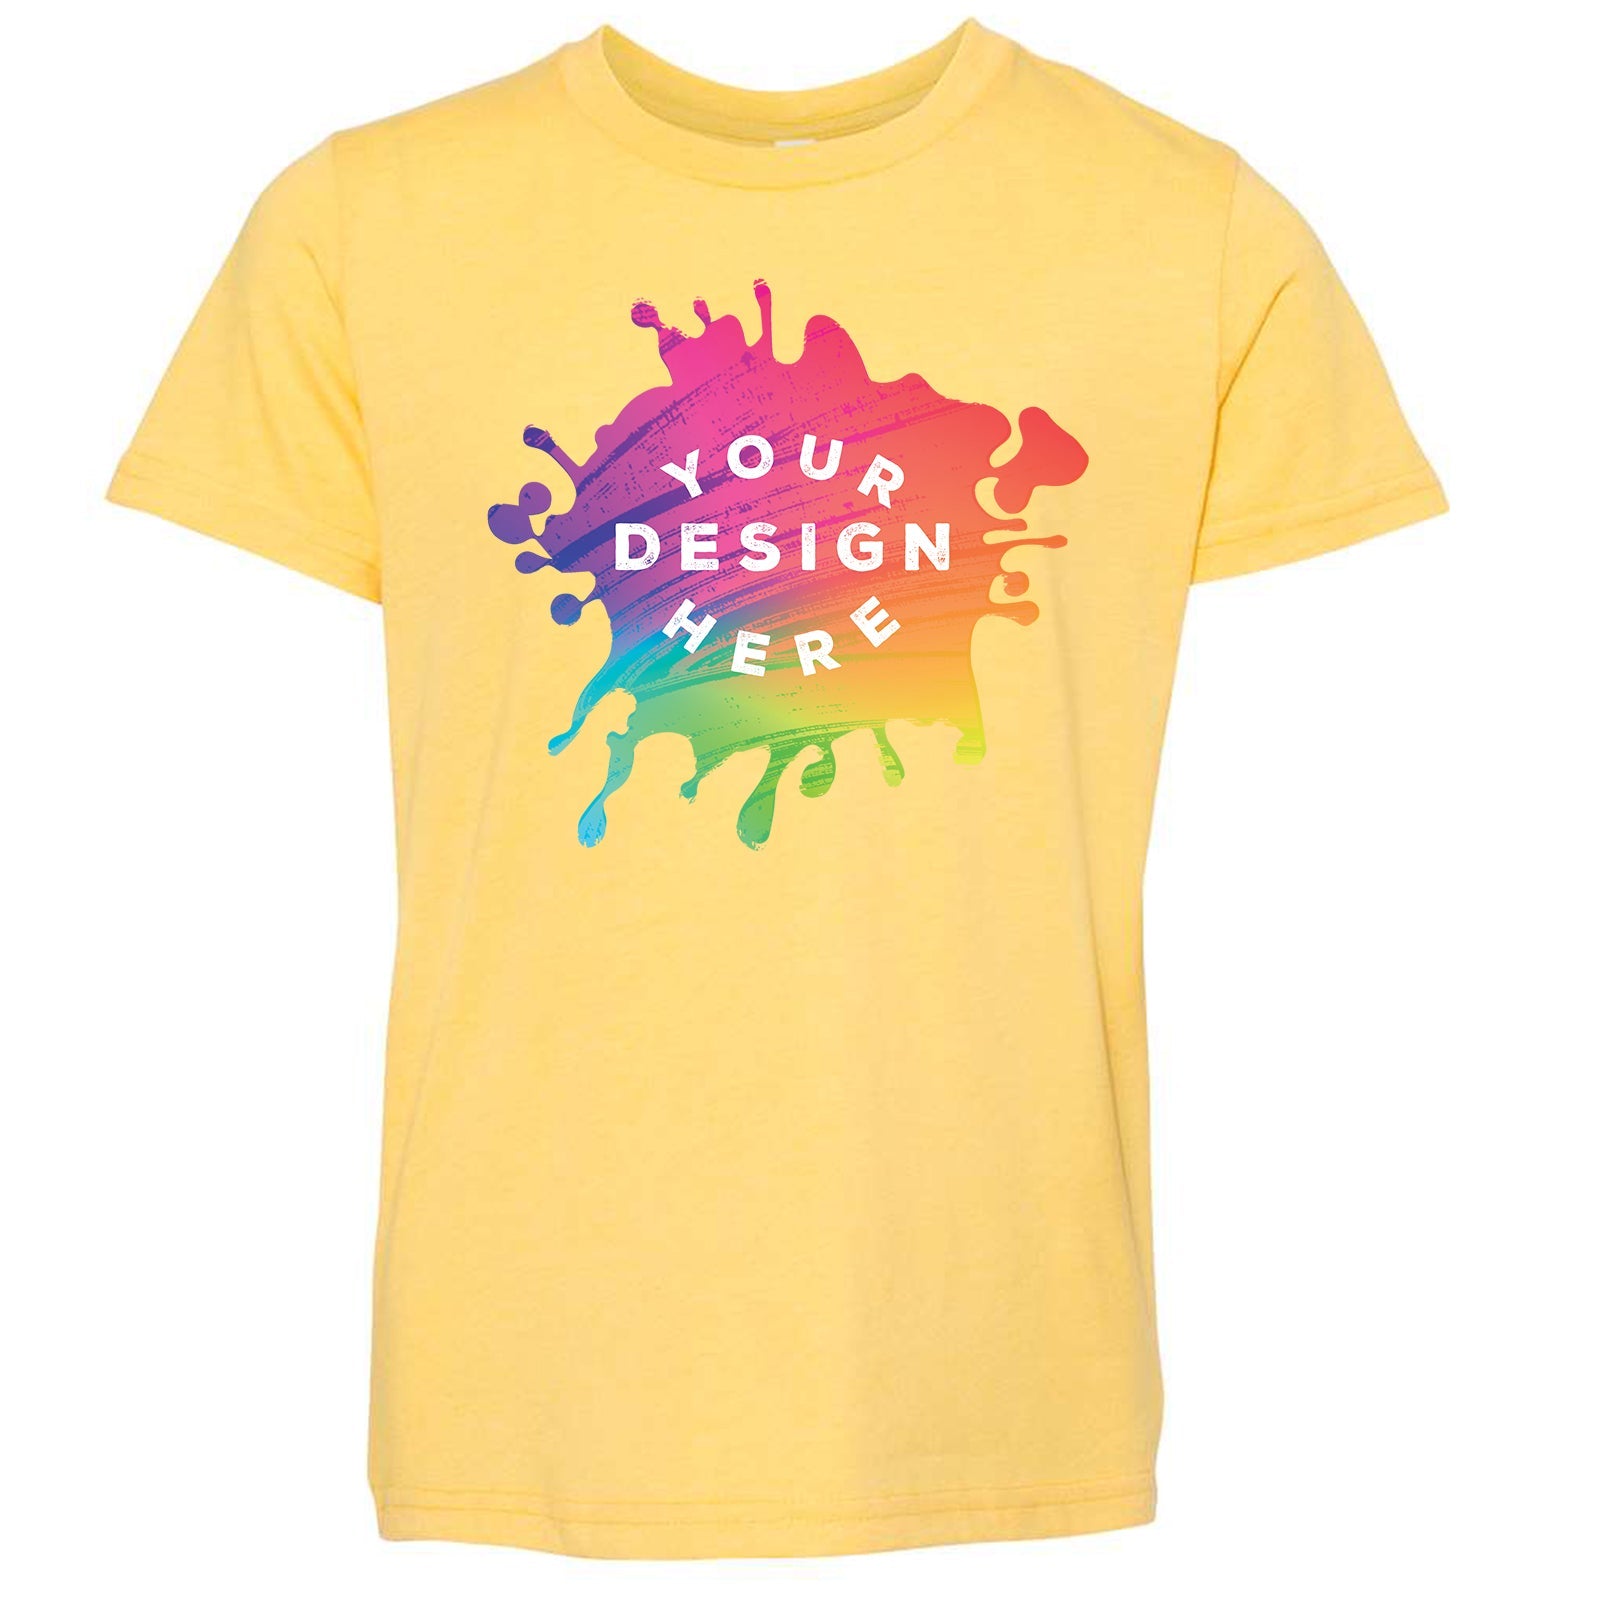 Bella + Canvas Youth Unisex Cotton/Polyester Blend T-Shirt - Mato & Hash